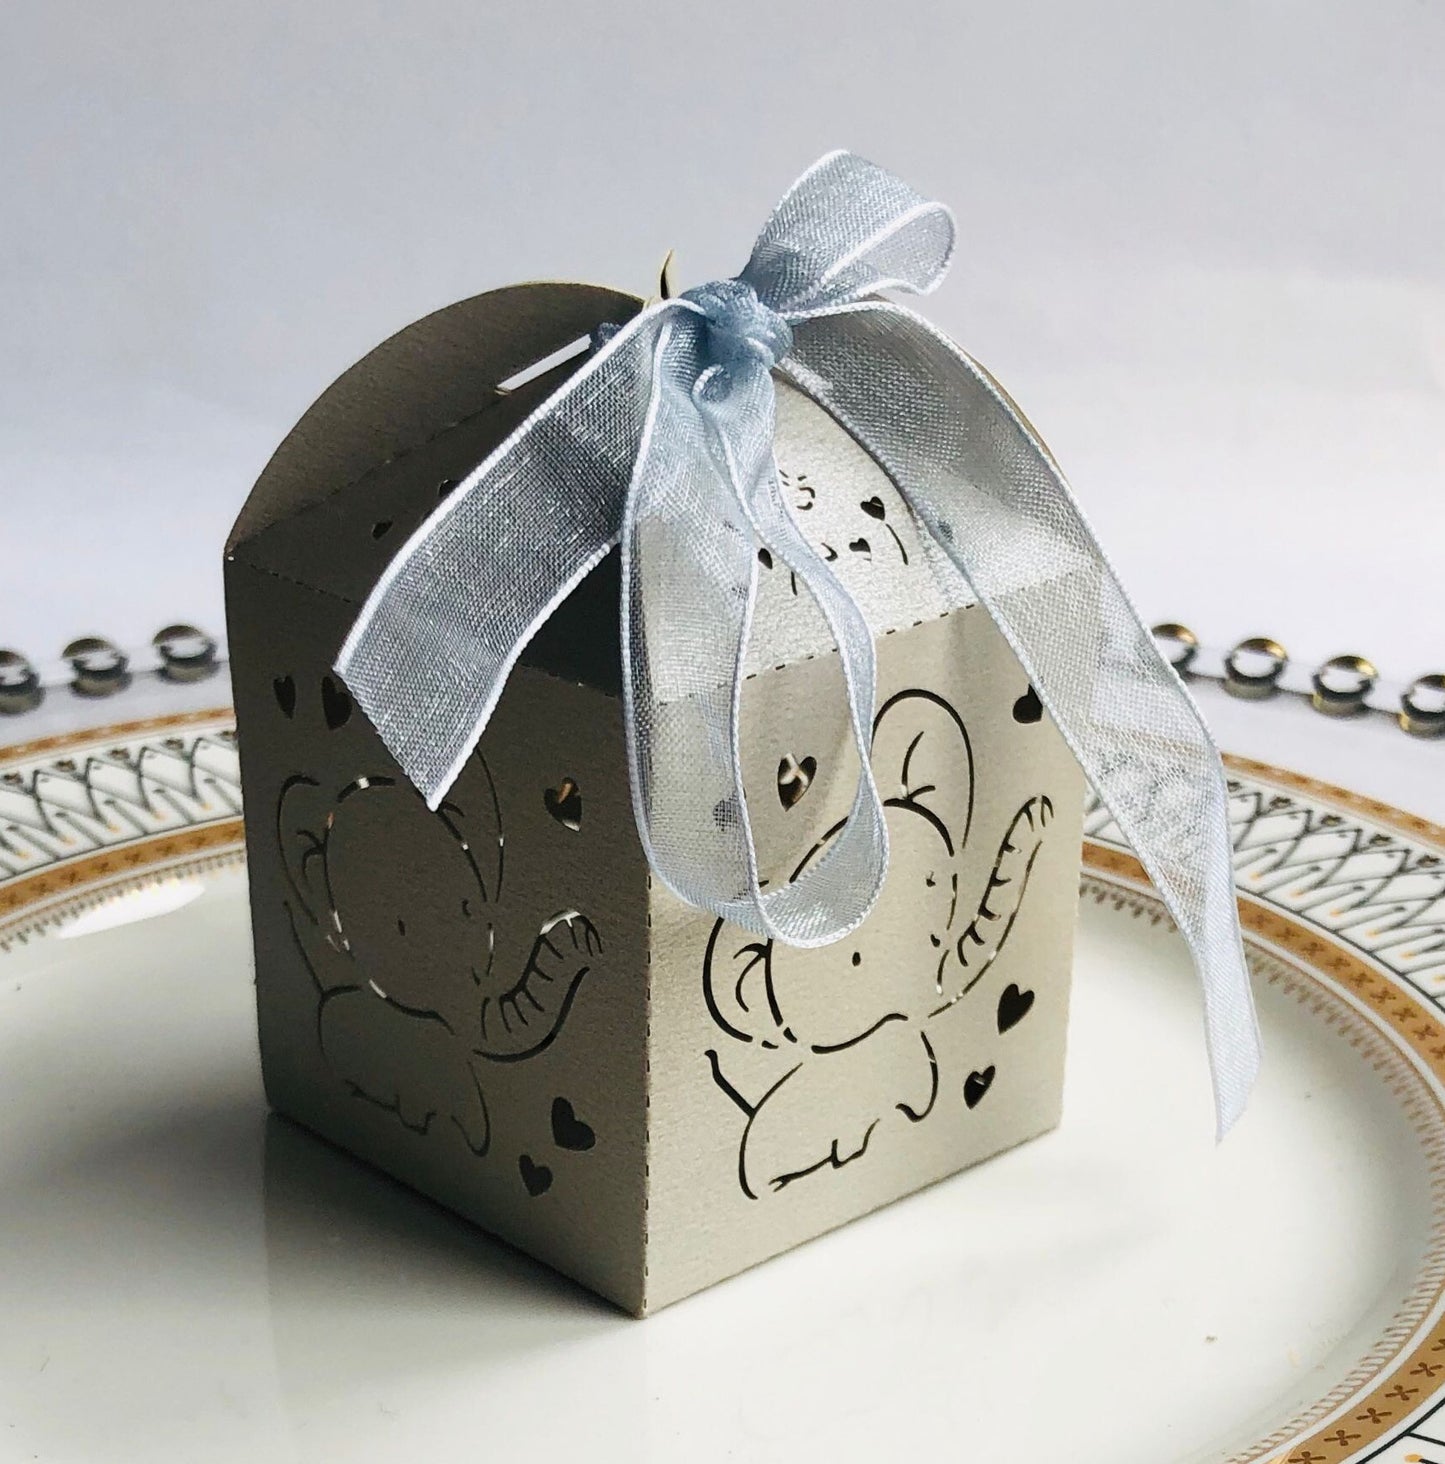 Elephant Shaped Candy Box for Baby Shower